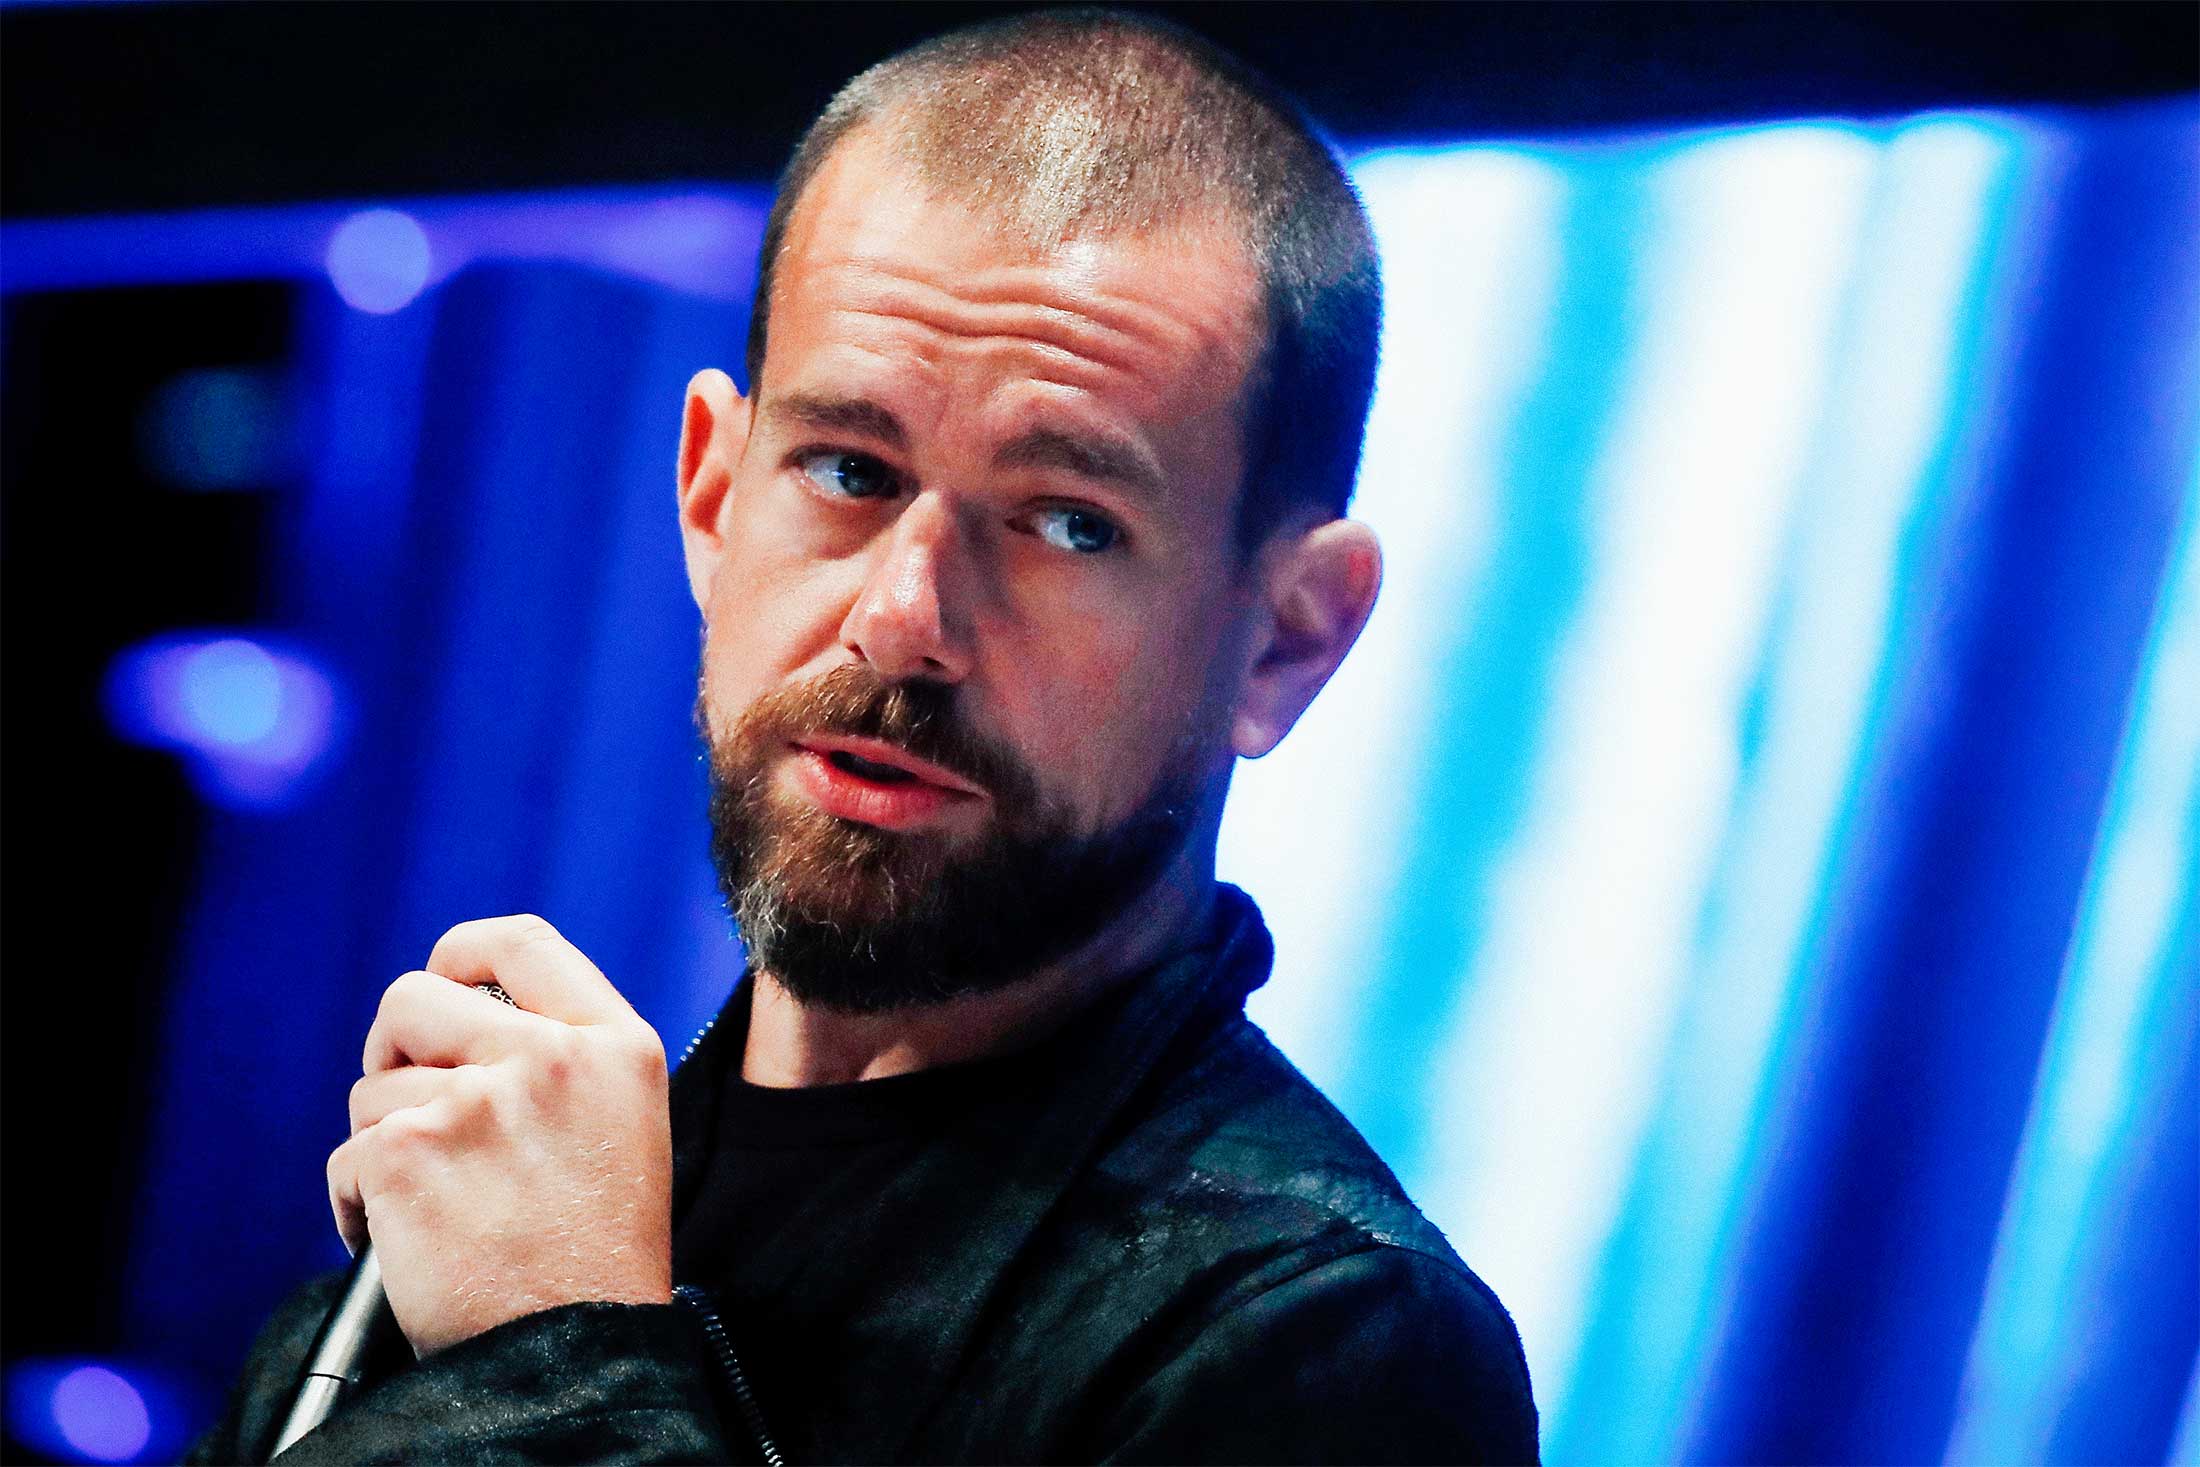 Twitter CEO and co-founder Jack Dorsey speaks at the Consensus 2018 conference in New York on May 16.